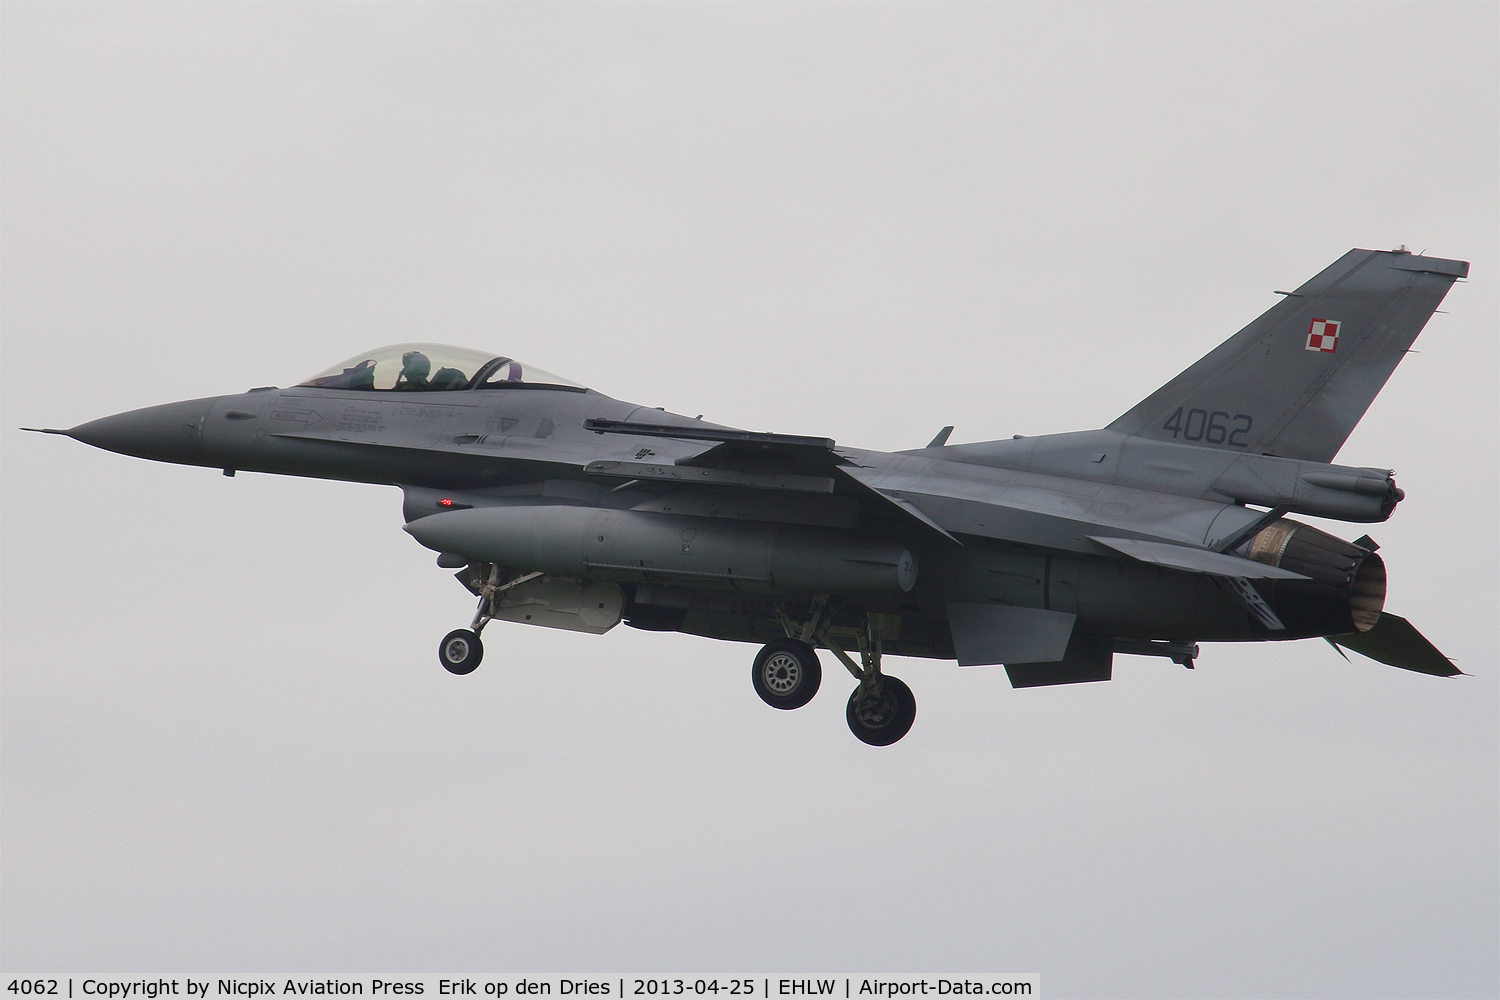 4062, Lockheed Martin F-16C Fighting Falcon C/N JC-23, 4062 returning from another Frisian Flag 2013  mission